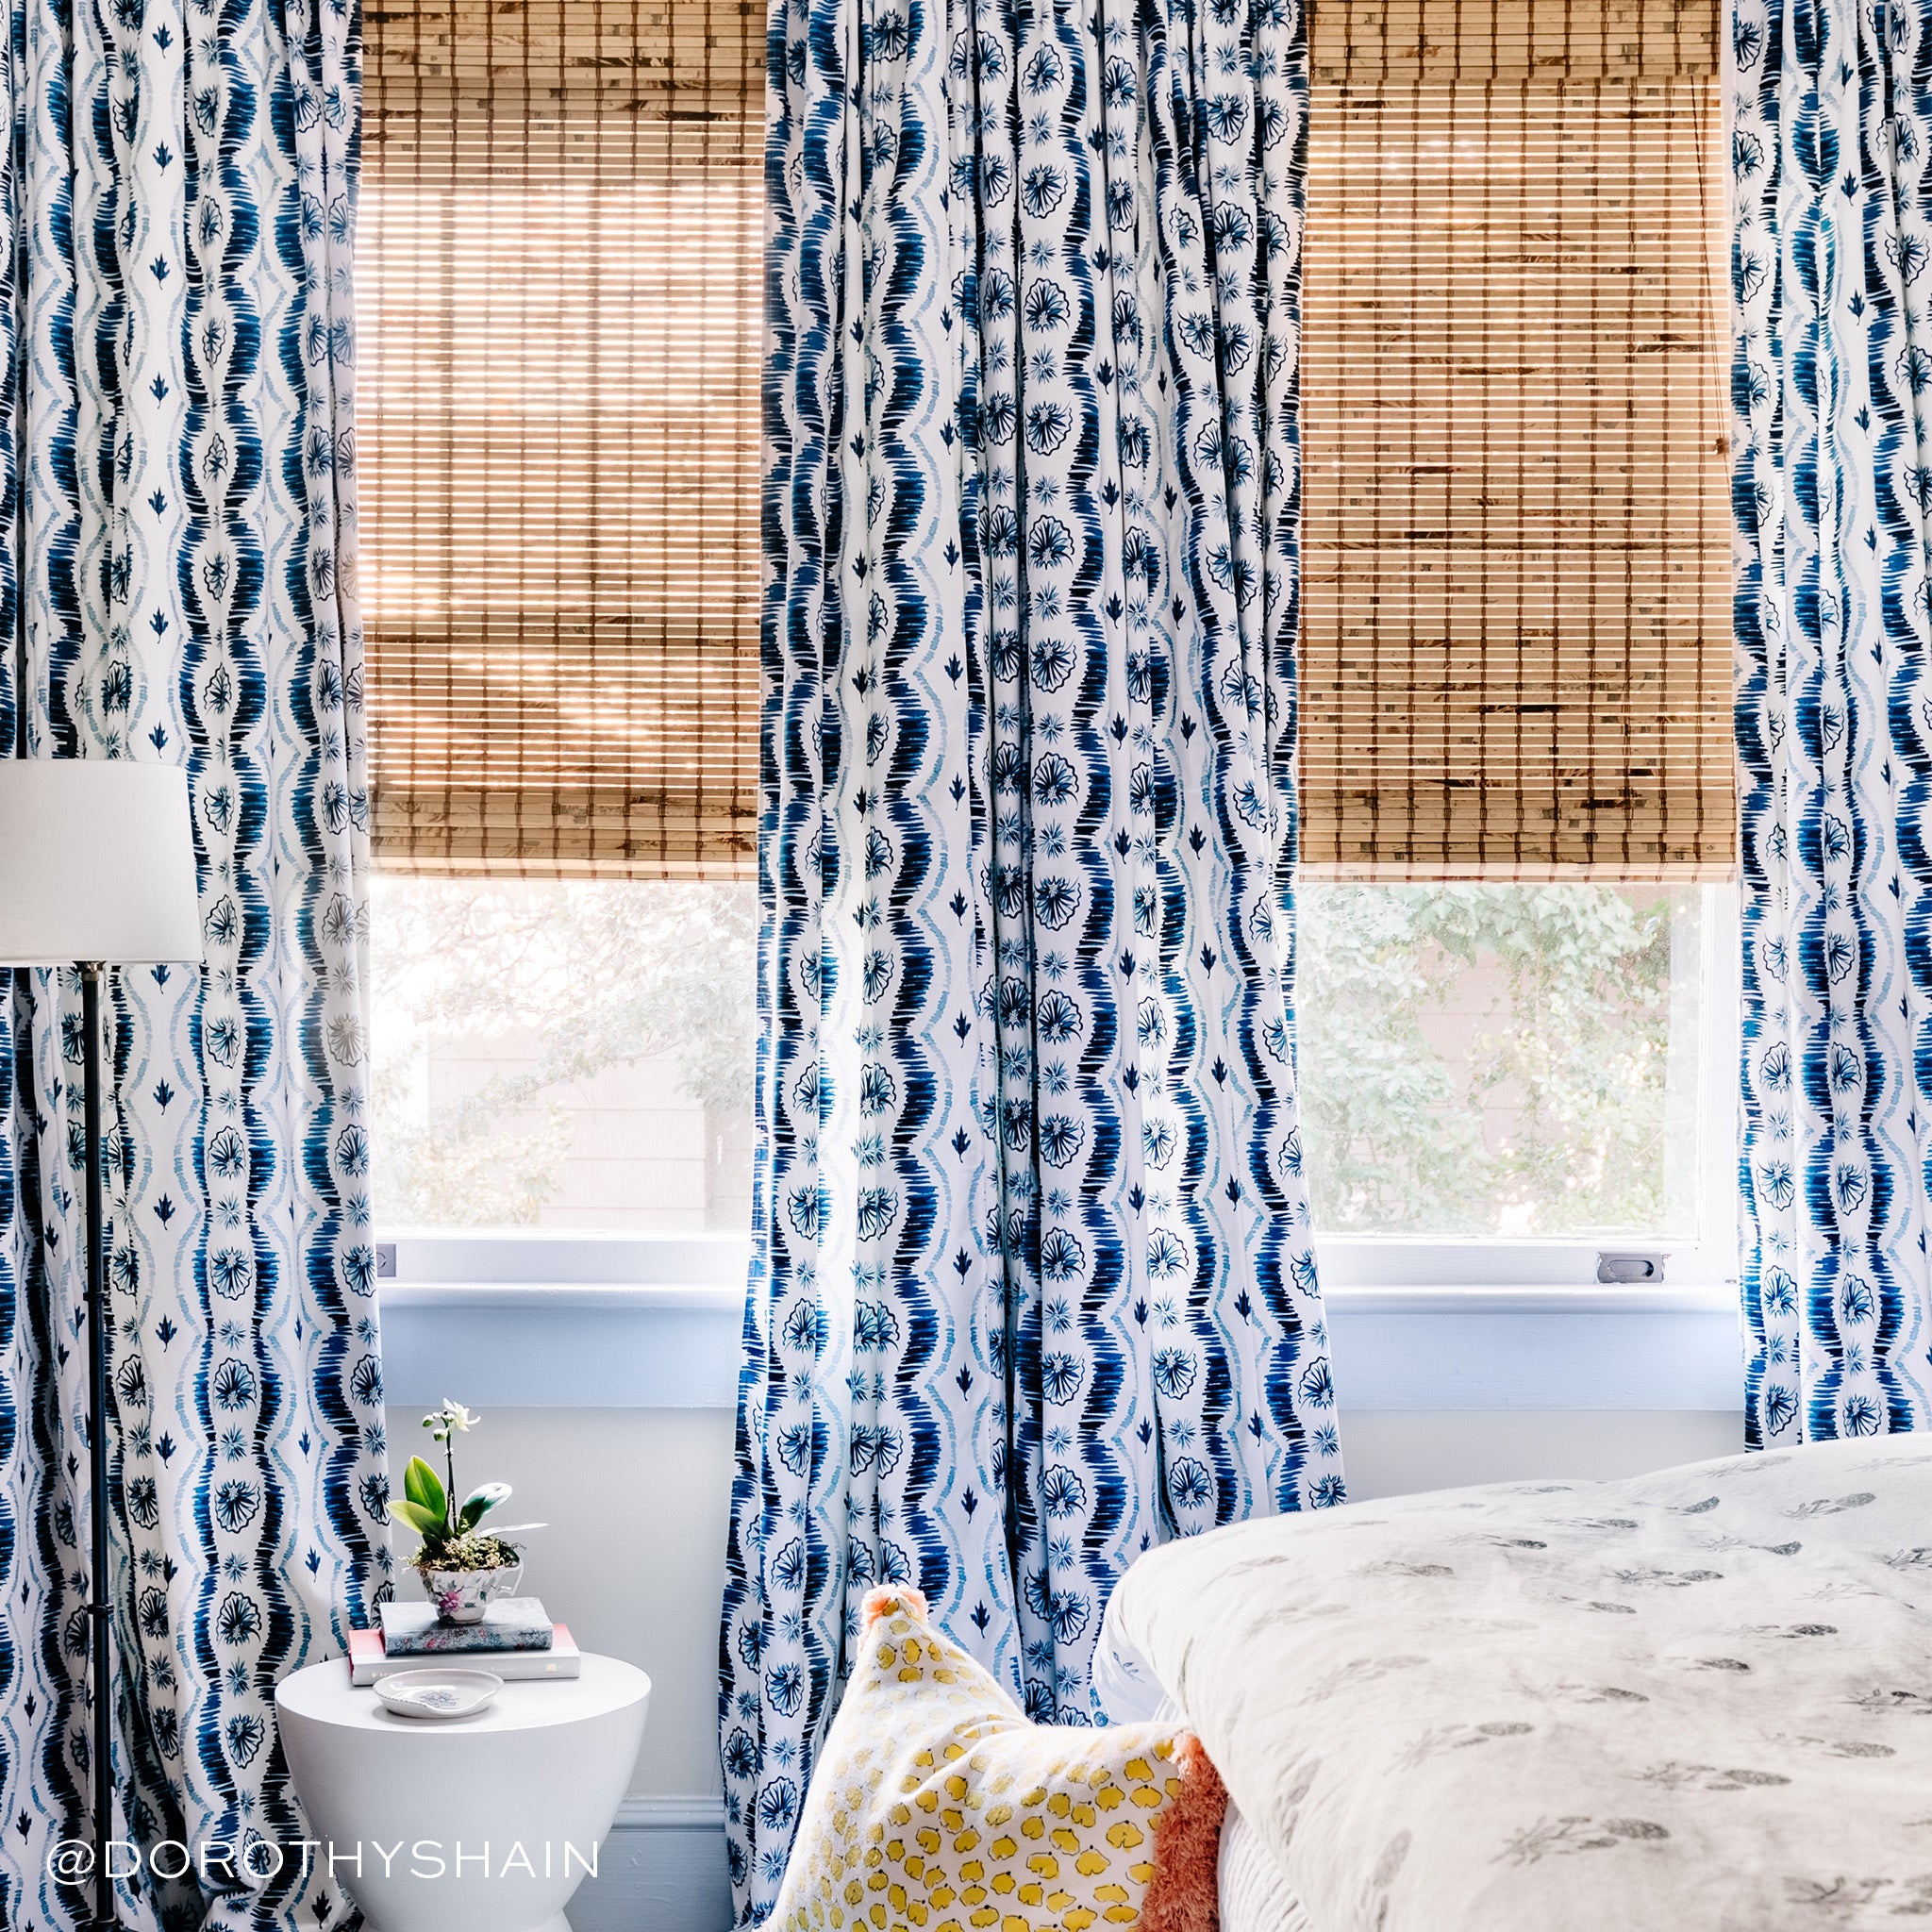 Blue Ikat printed curtains by bed and white coffee table with two books and flower on top